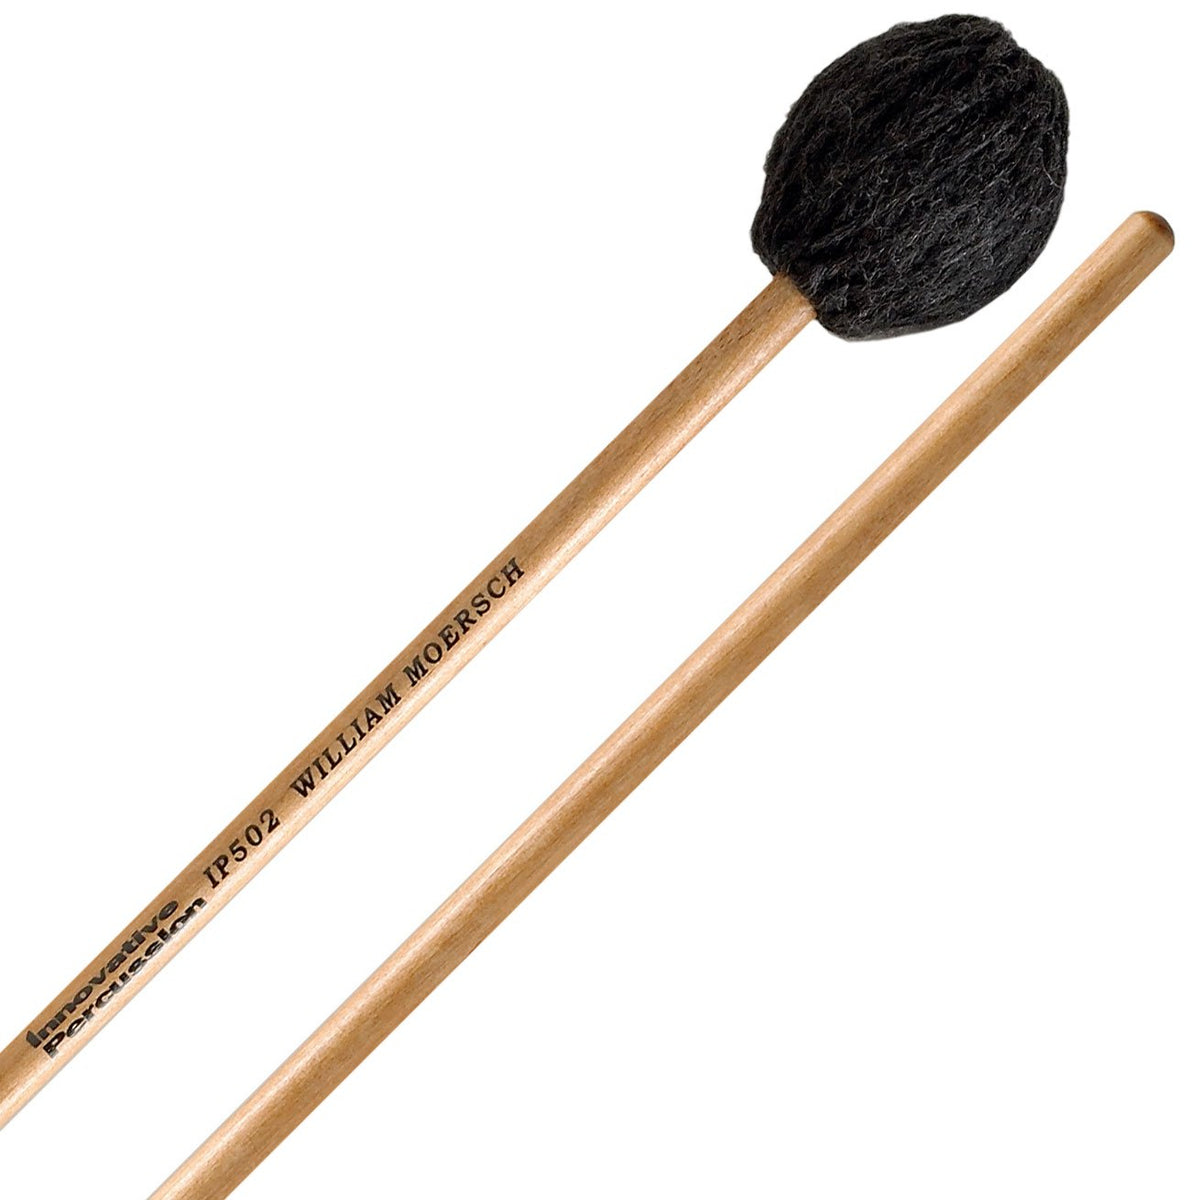 Innovative Percussion - William Moersch Series Concert Marimba Mallets-Percussion-Innovative Percussion-IP502: Medium Soft (Synthetic Core)-Music Elements